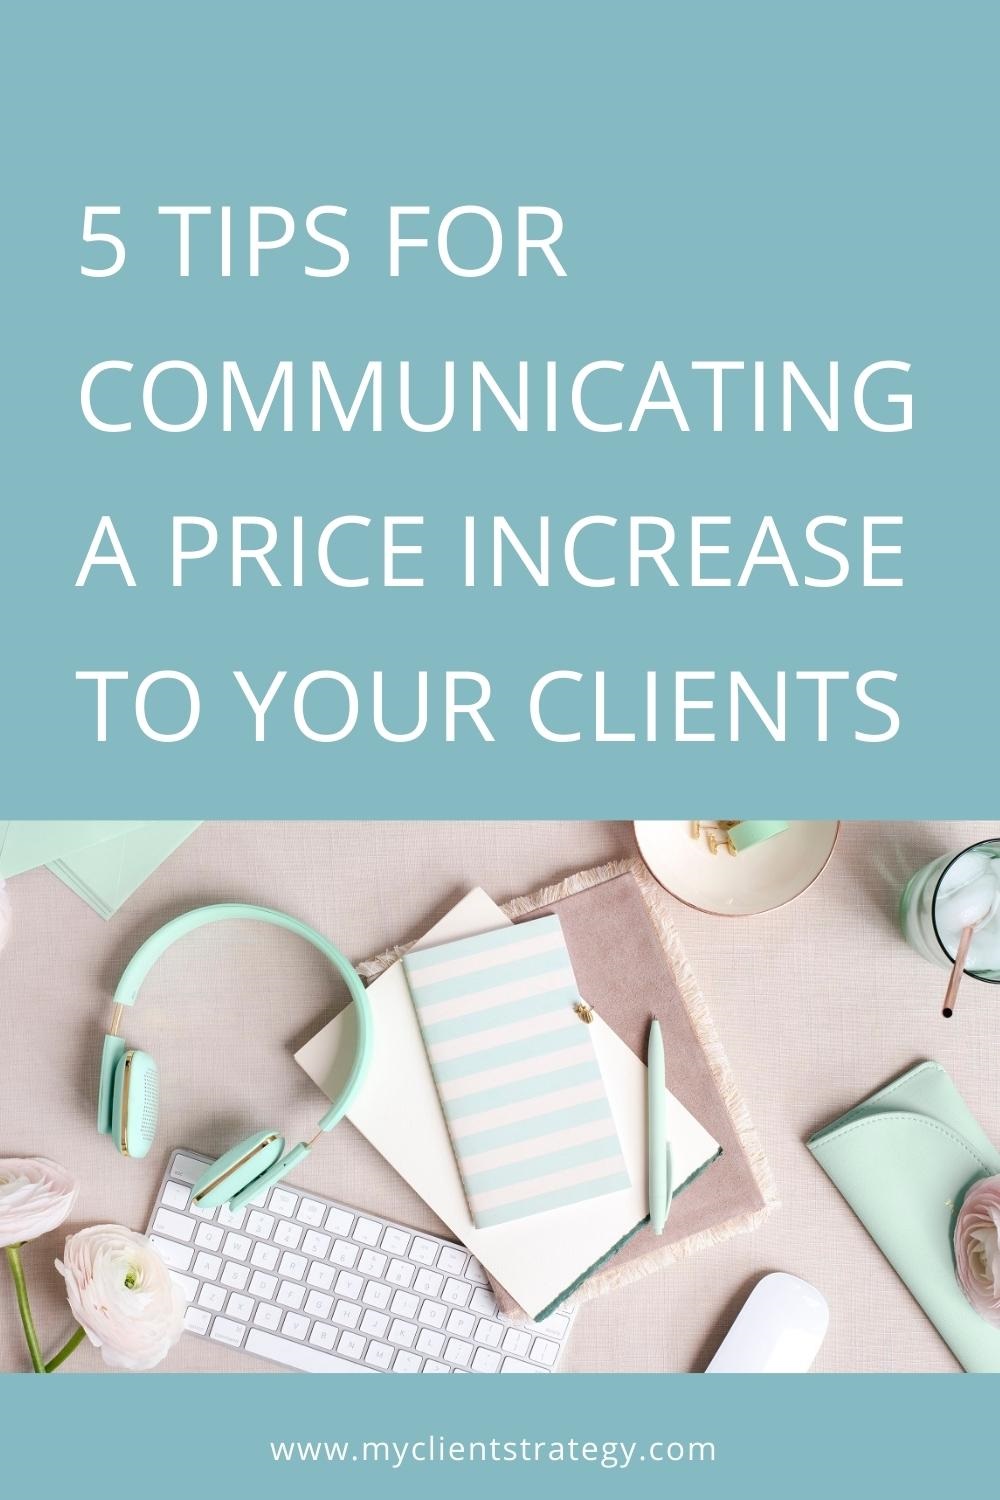 Tips for communicating a price increase to your clients